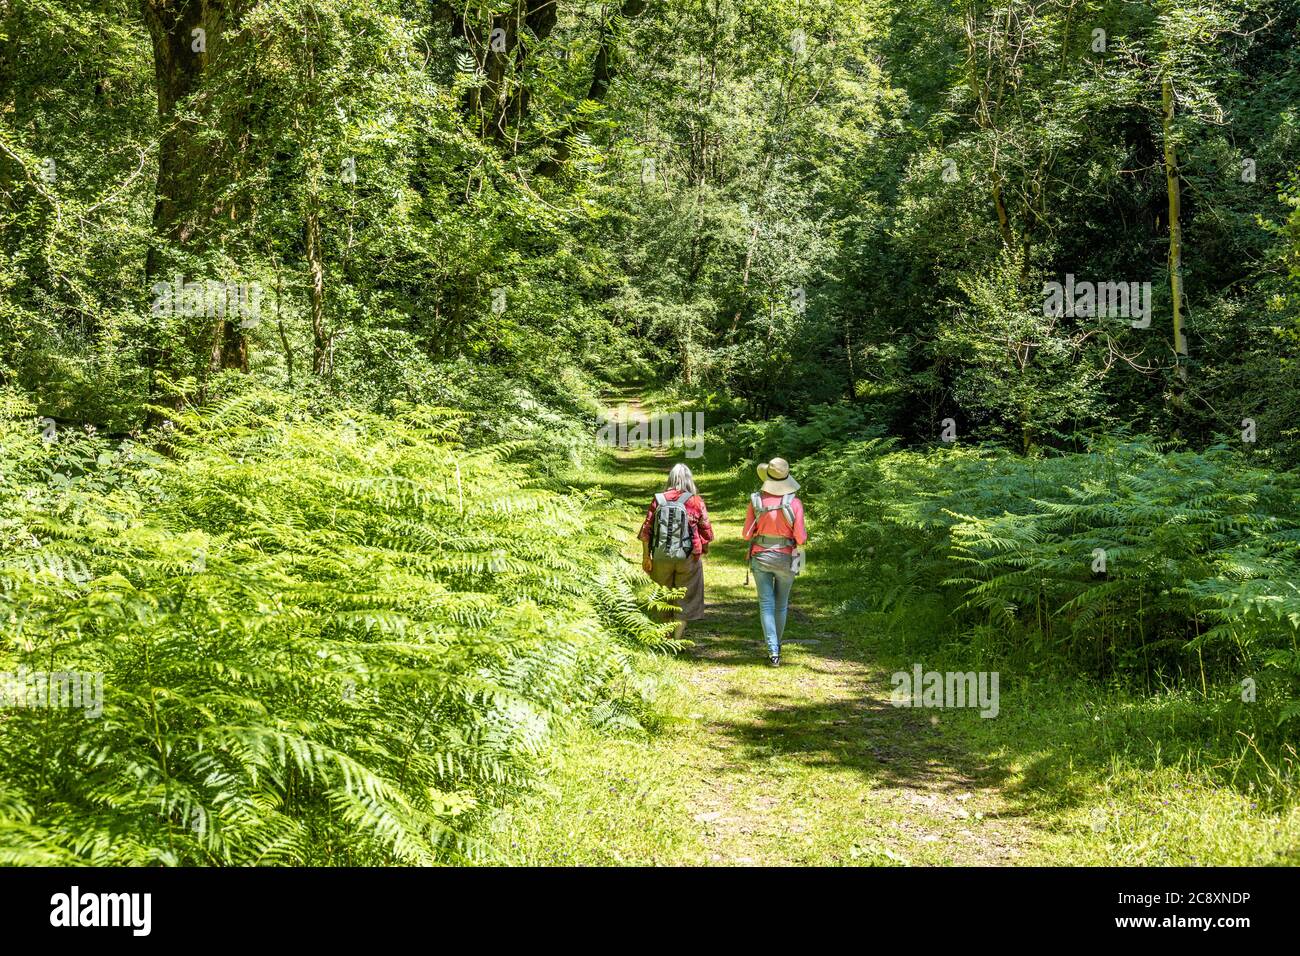 Two lady hikers walking in Dunkery and Horner Wood National Nature Reserve at Horner Wood on Exmoor National Park, Somerset UK Stock Photo